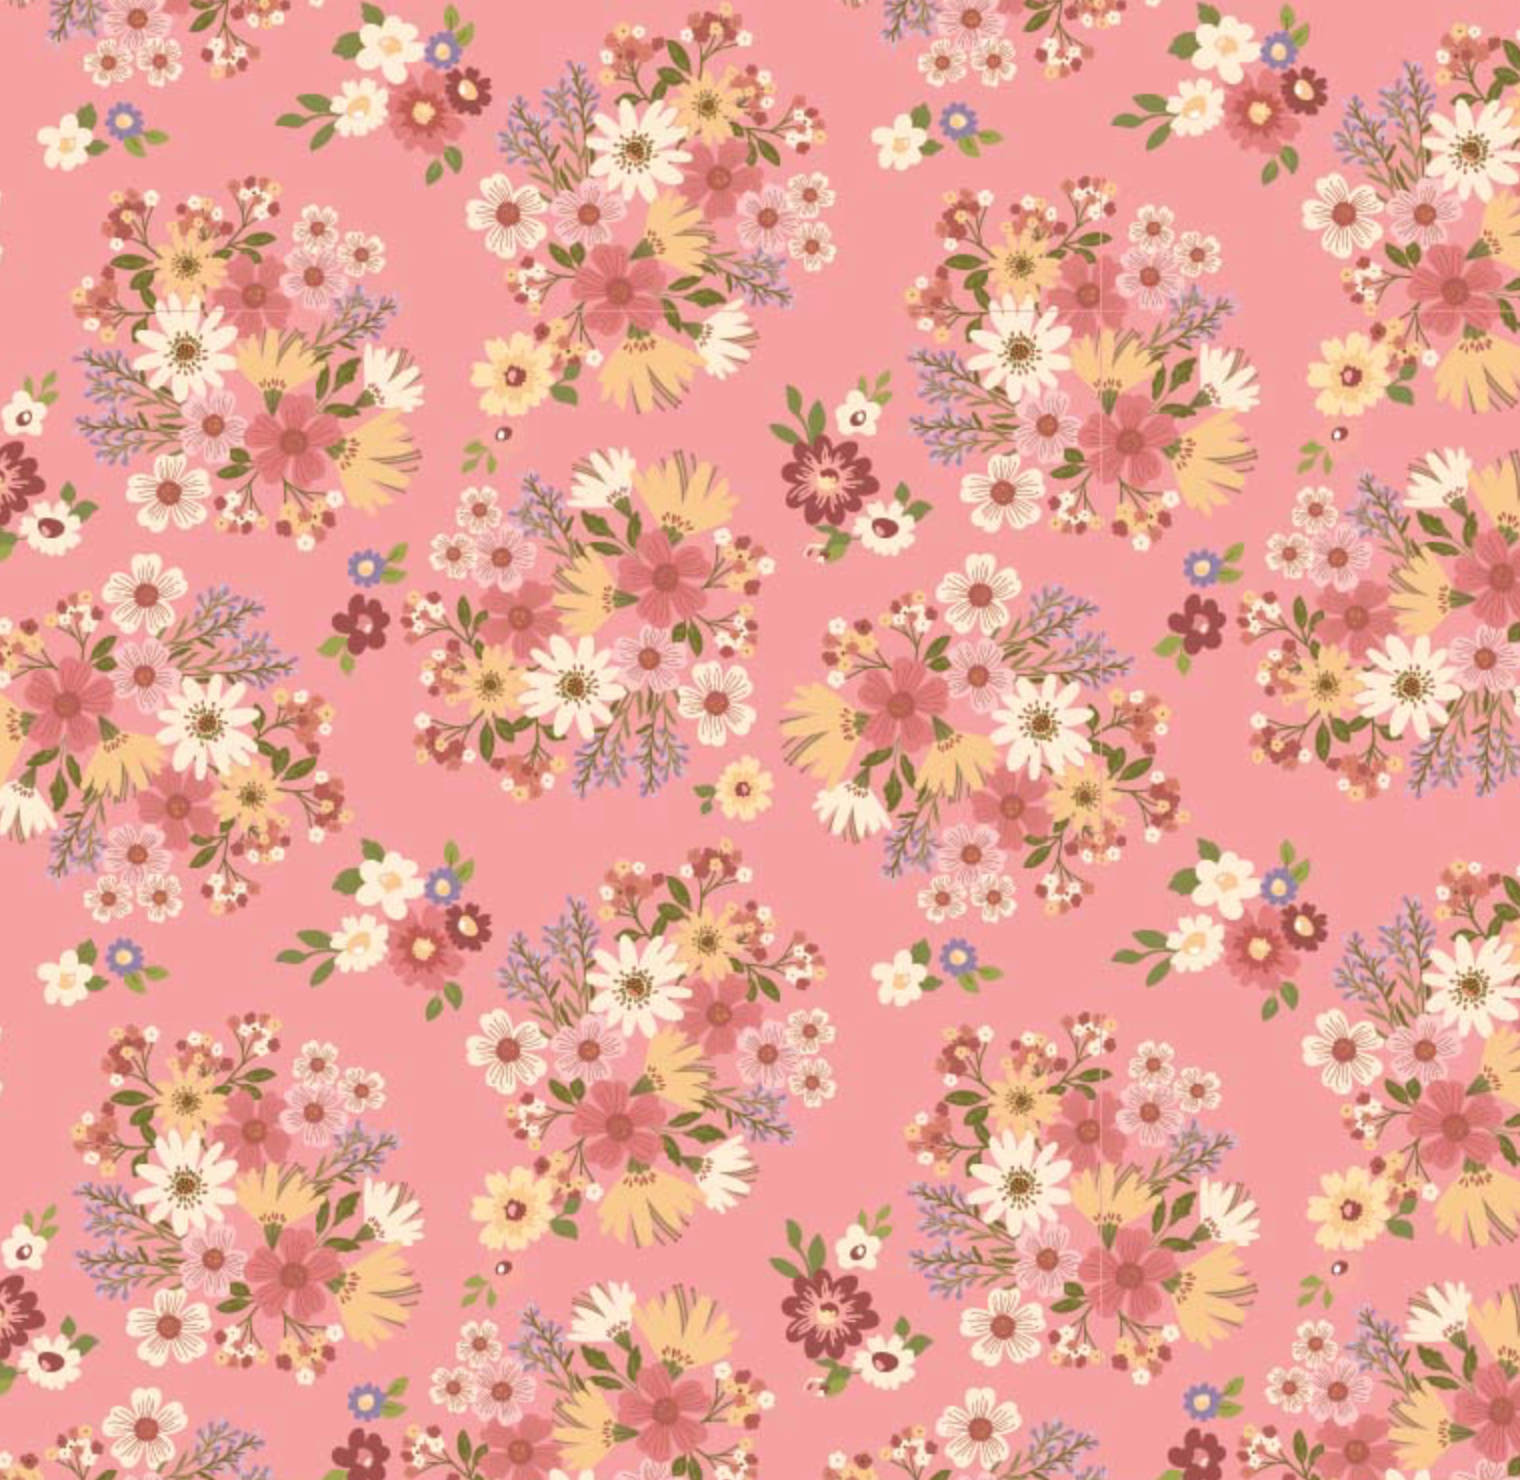 Nature Sings Fabric, Send Her Flowers, Pink, NS24101, sold by the 1/2 yard - Good Vibes Quilt Shop